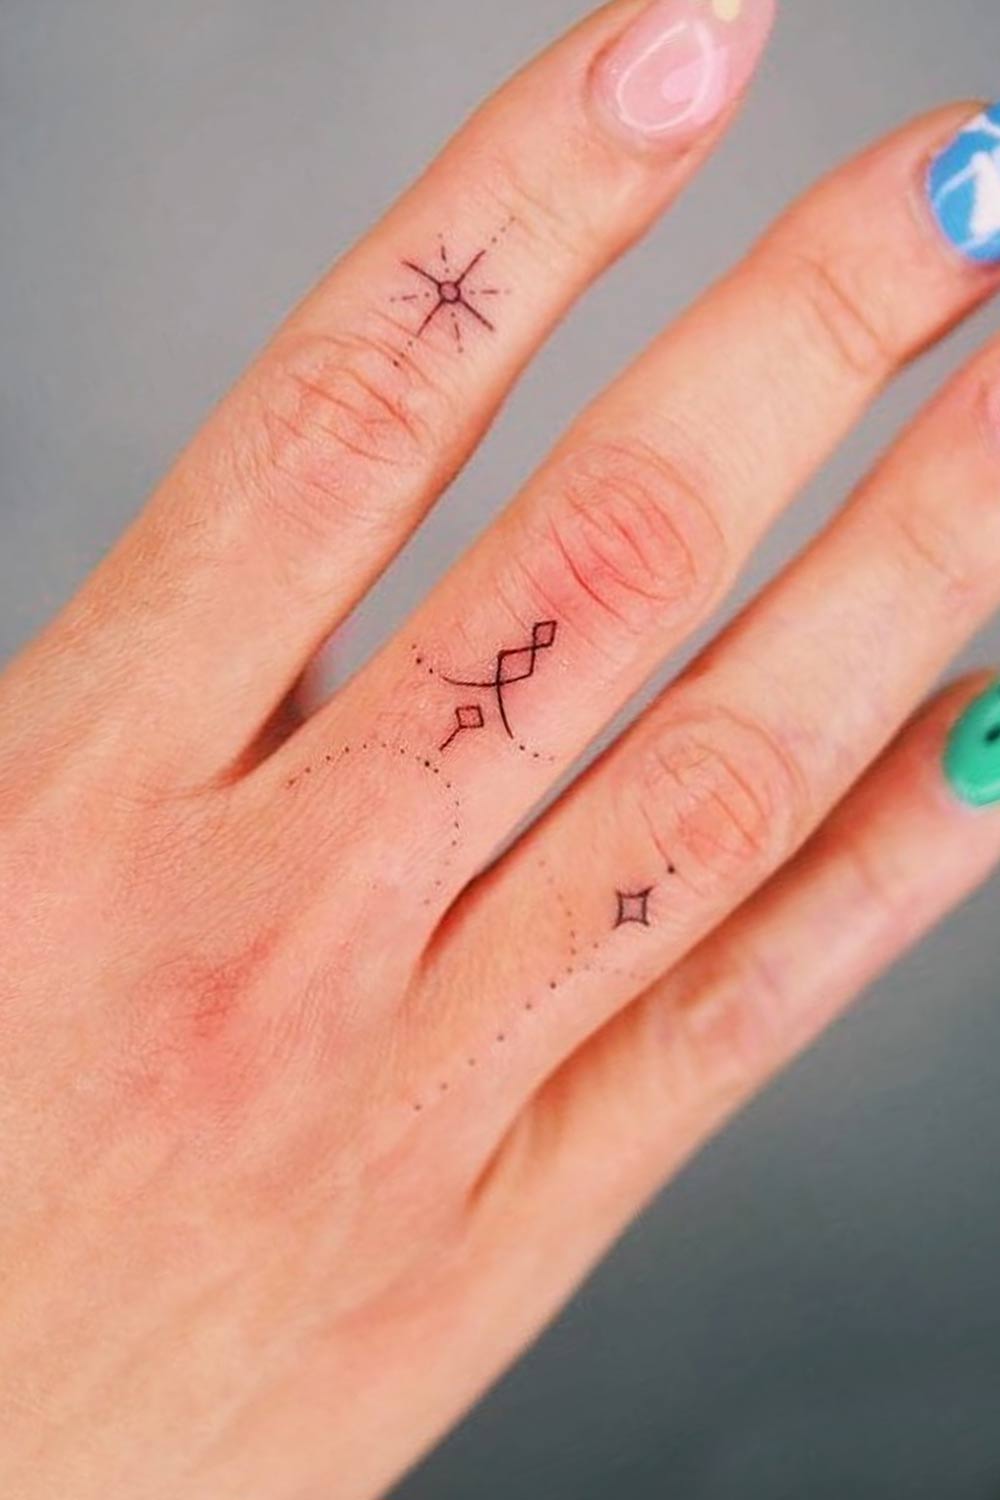 Finger Tattoo Ideas That Are Subtle And Adorable - Society19